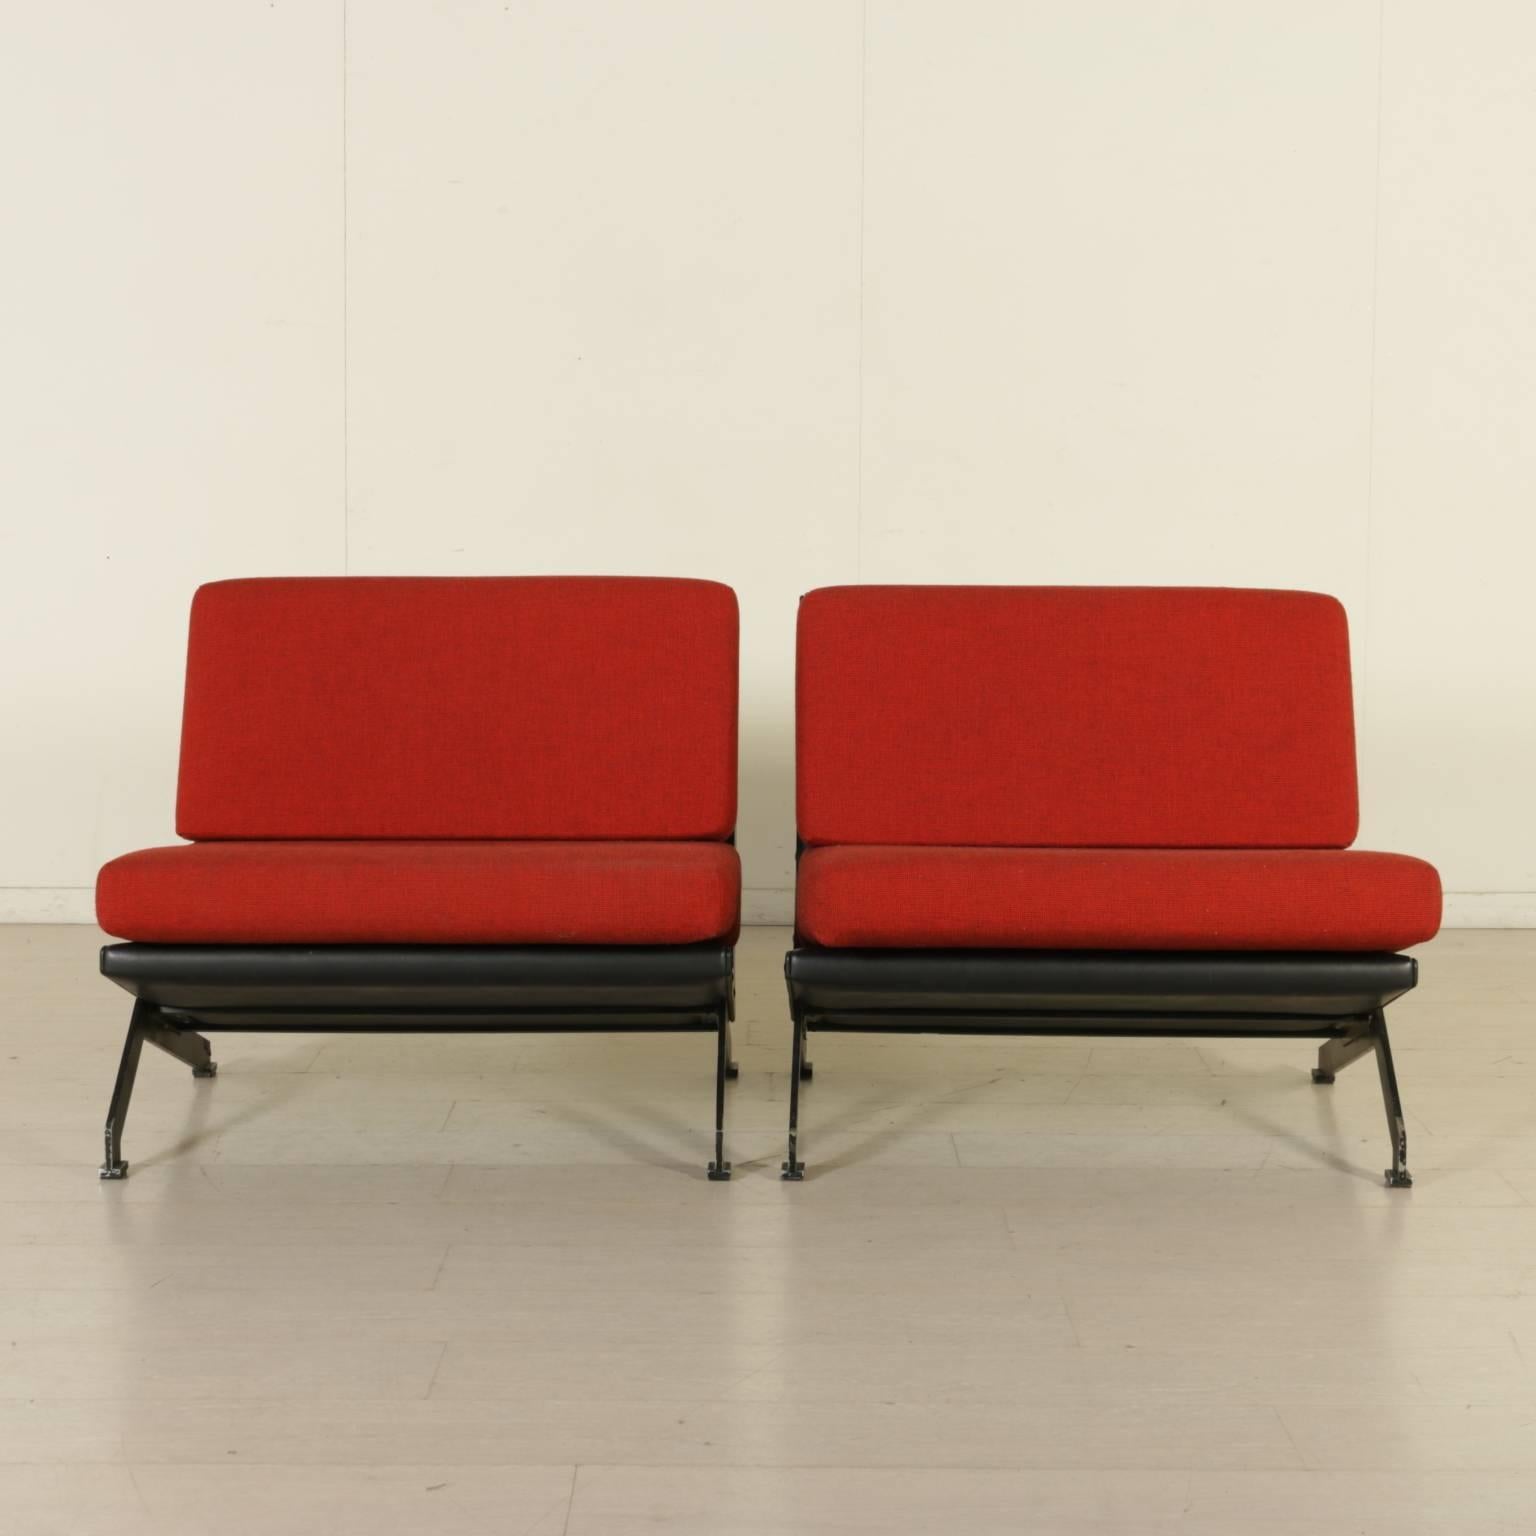 Pair of armchairs designed by Giulio Moscatelli for Fromanova, oxidized steel structured, padded wooden seat with leather upholstery, fabric upholstered foam cushions. Manufactured in Italy, 1960s-1970s. Model: Alessandra.